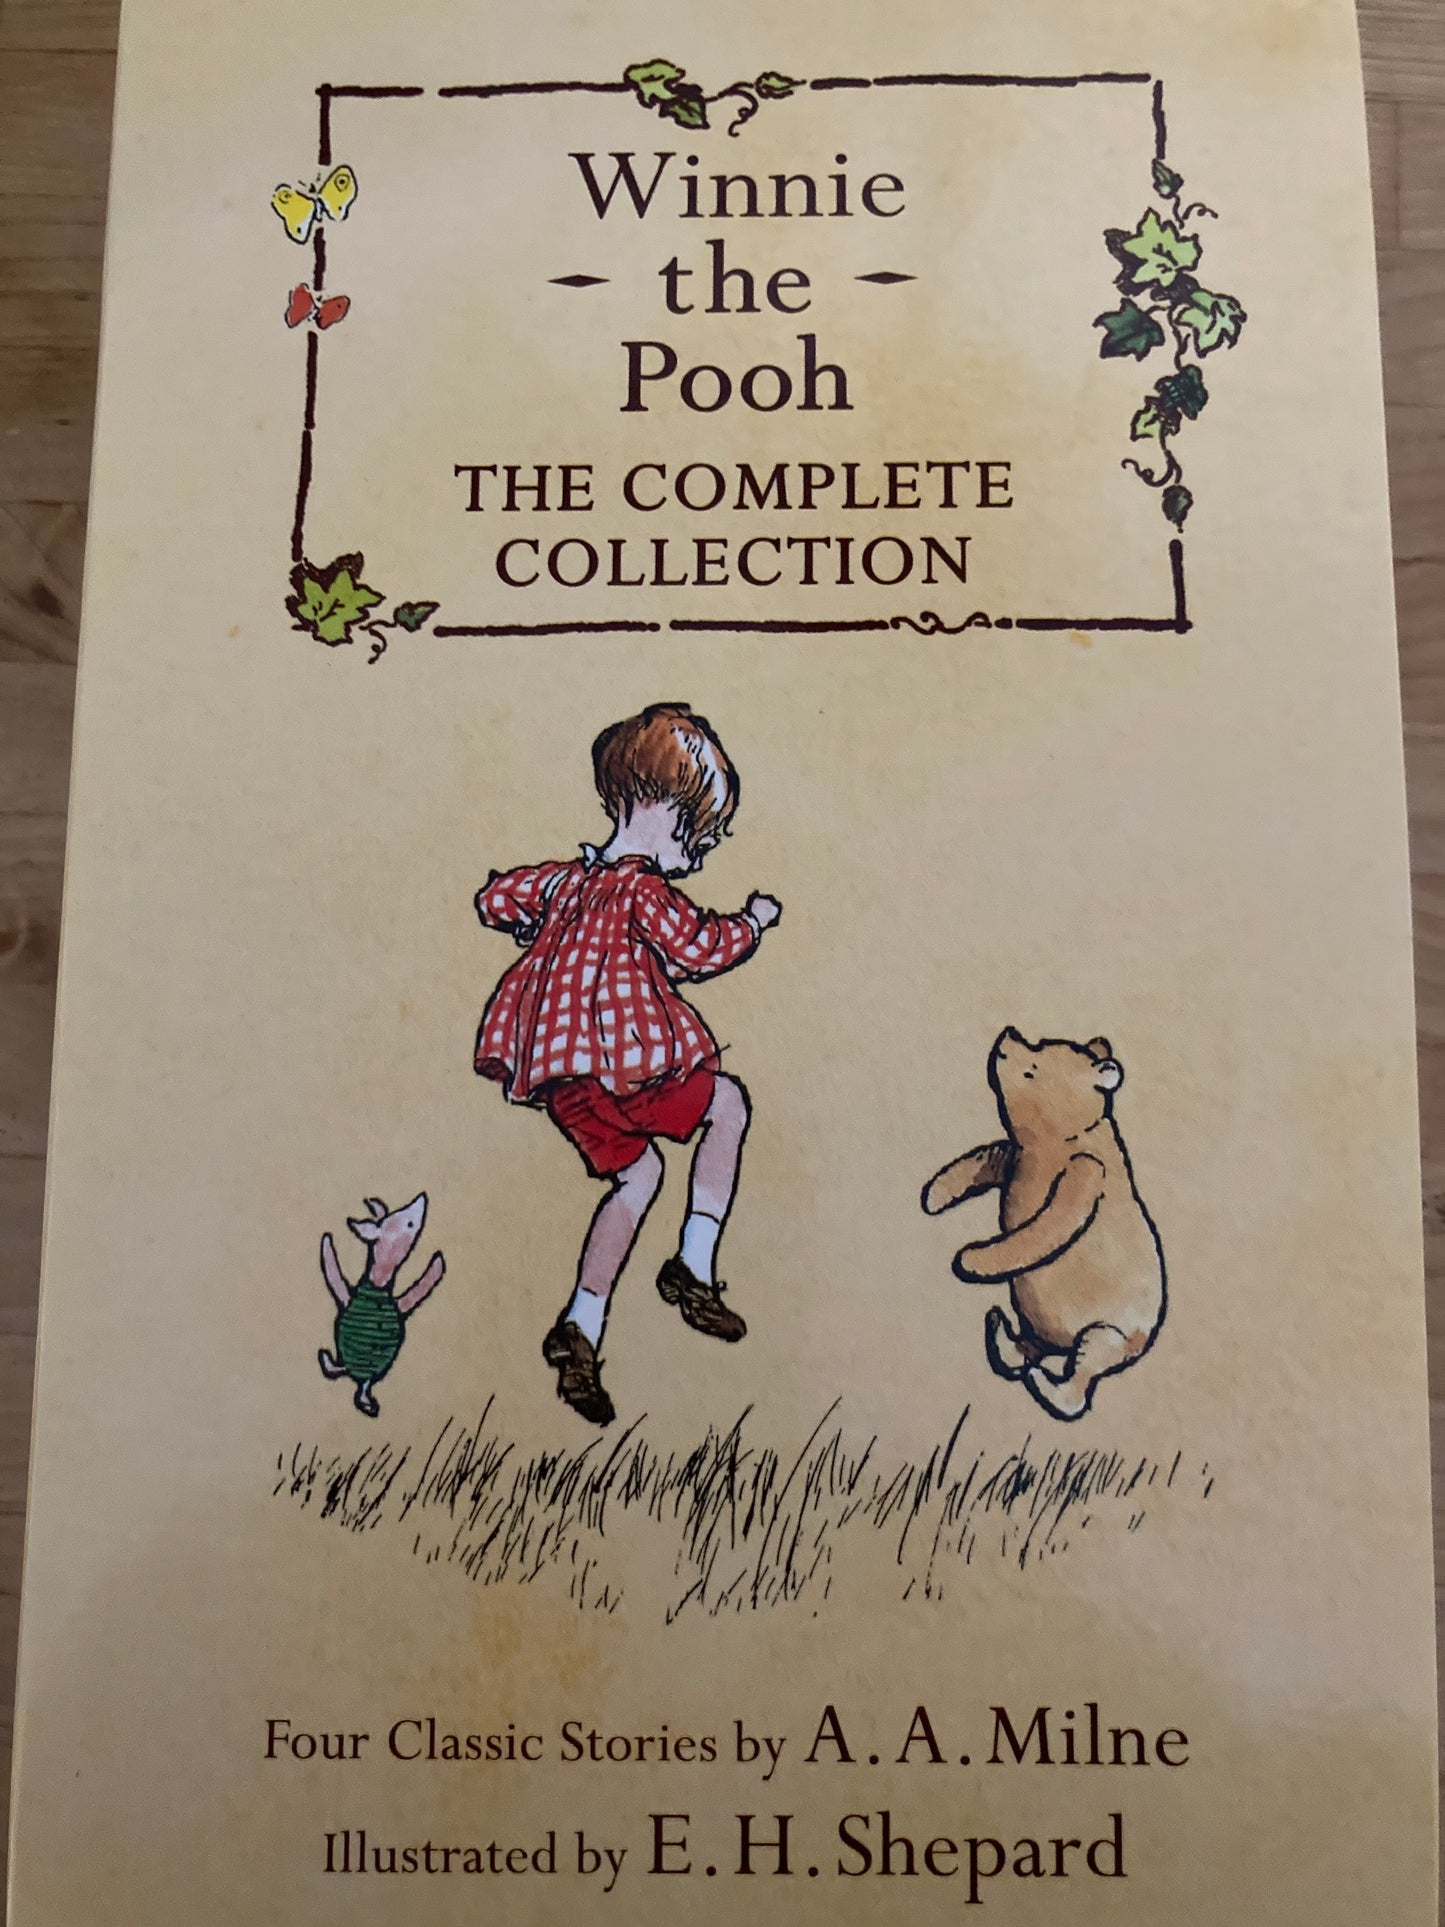 Chapter Book for Young Readers - WINNIE the POOH COLLECTION, All 4 Books by AA MILNE